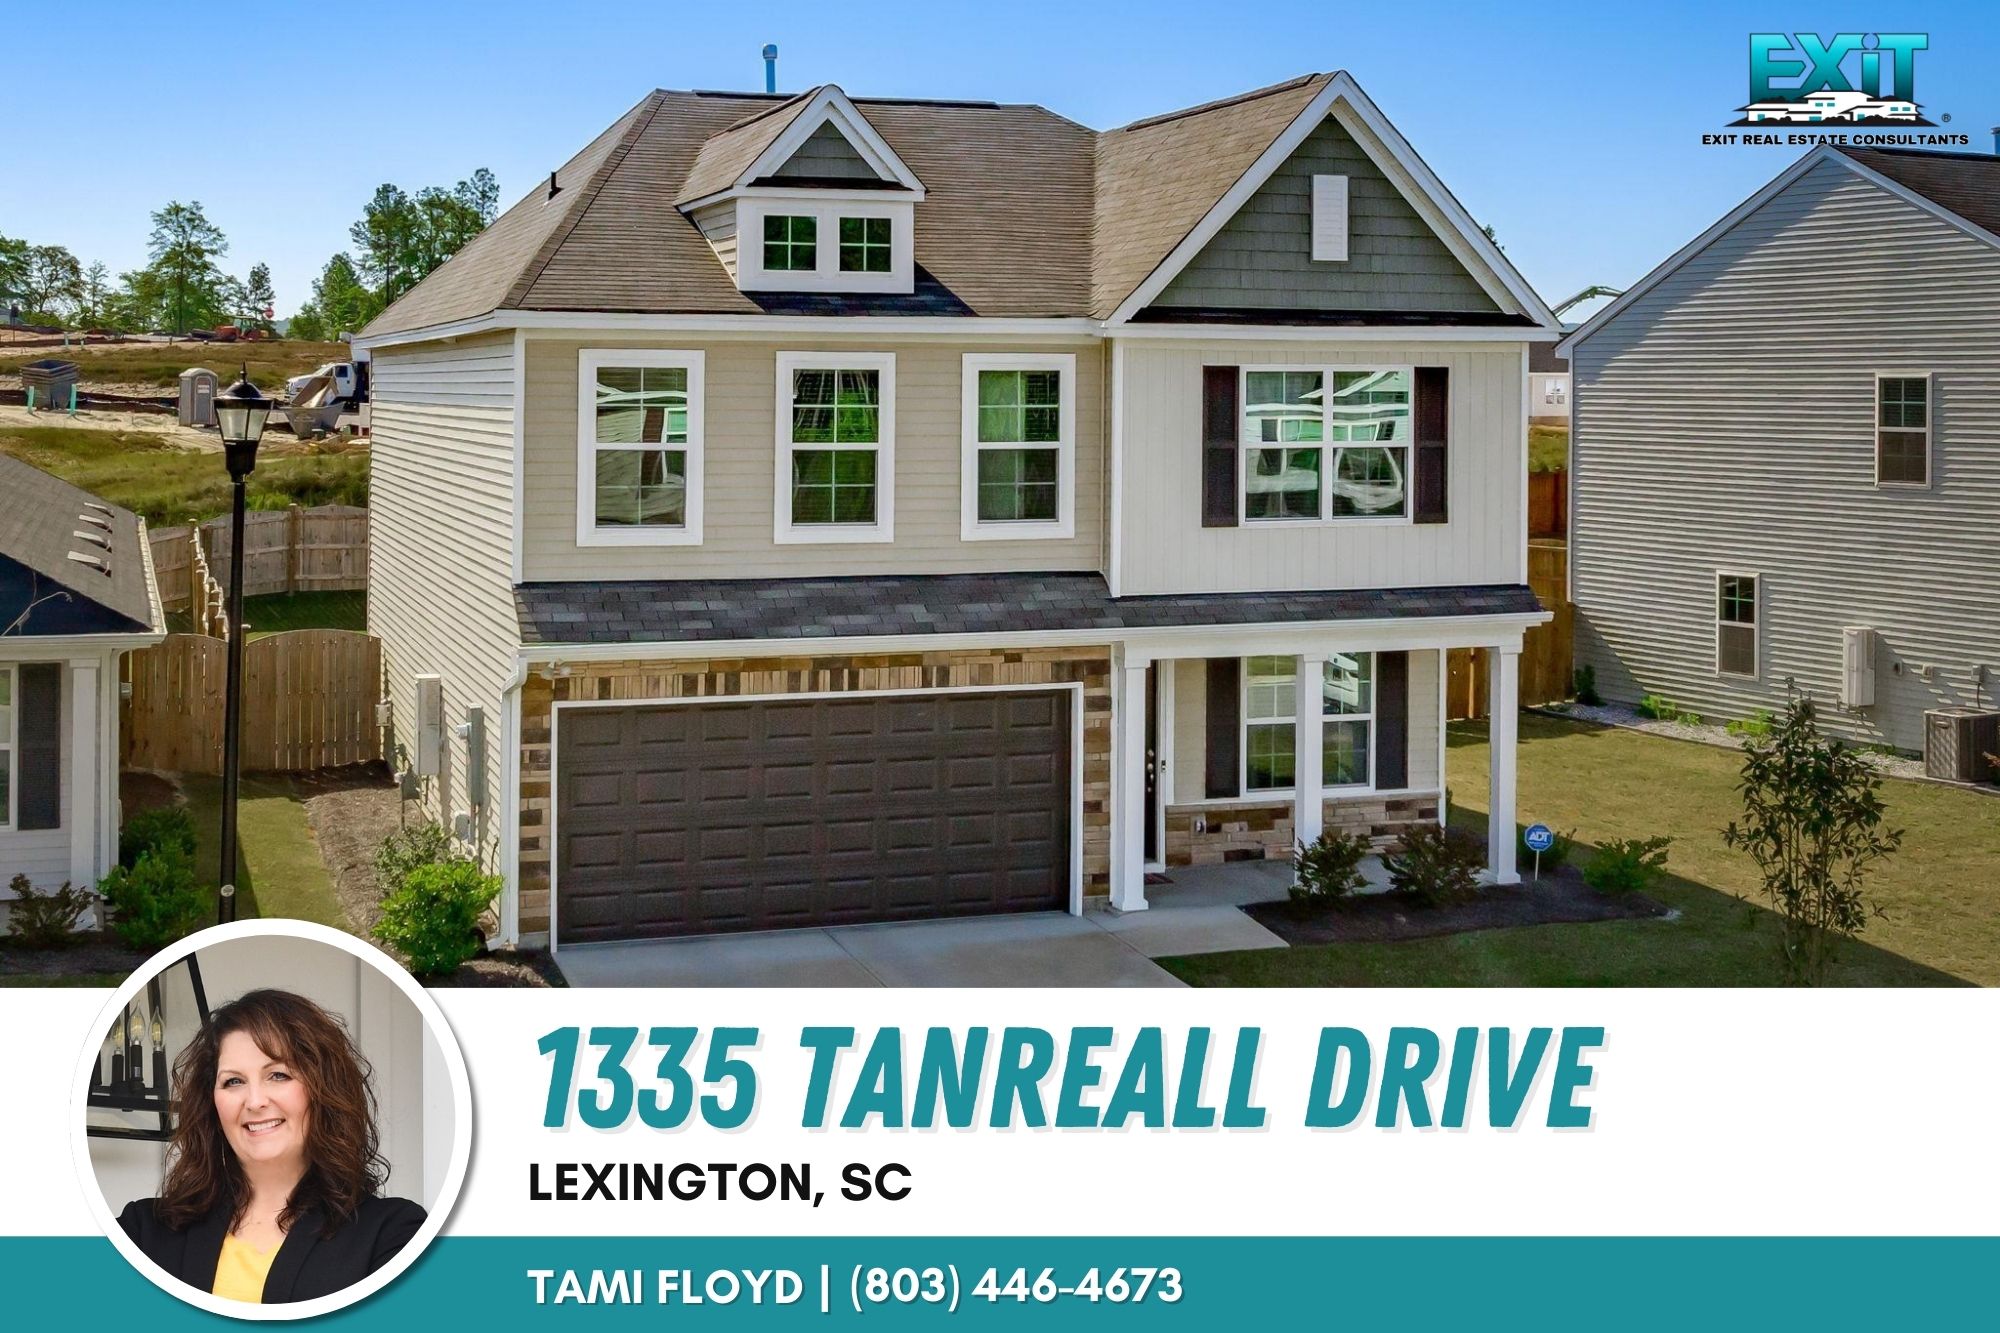 Just listed in Bluefield - Lexington